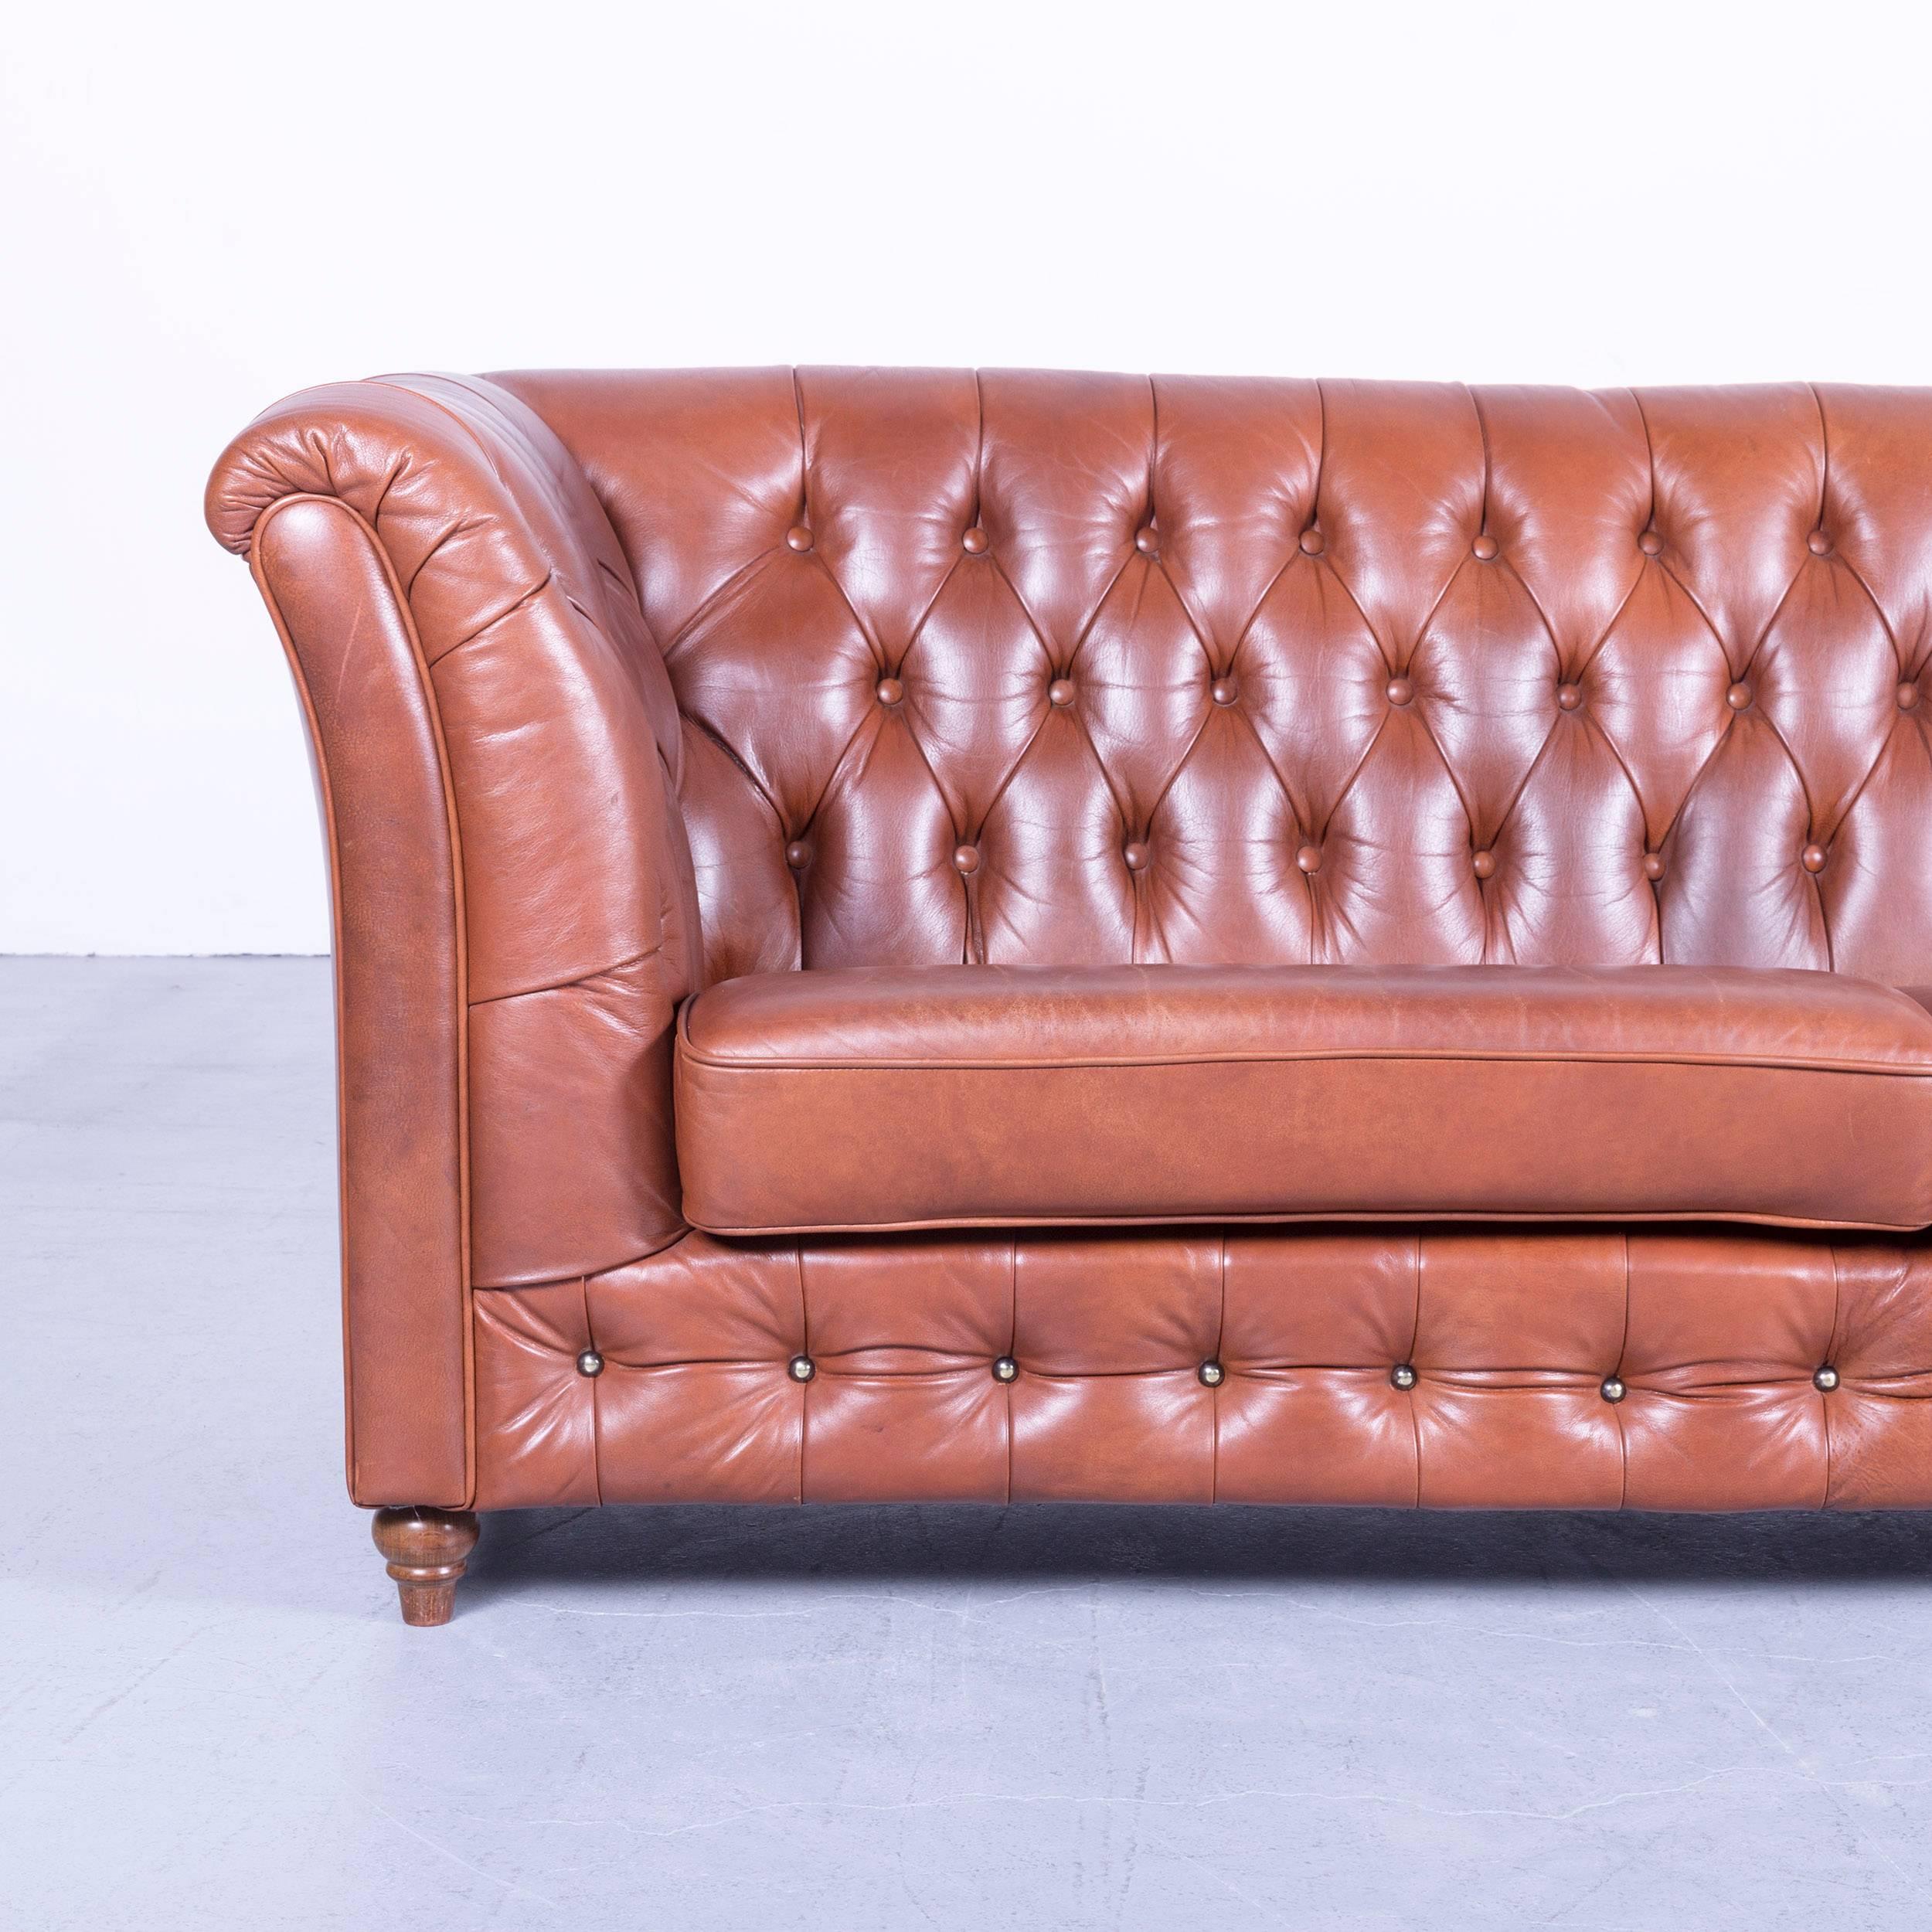 Chesterfield three-seat sofa in brown colour leather couch vintage retro rivets, made for pure comfort and elegance.